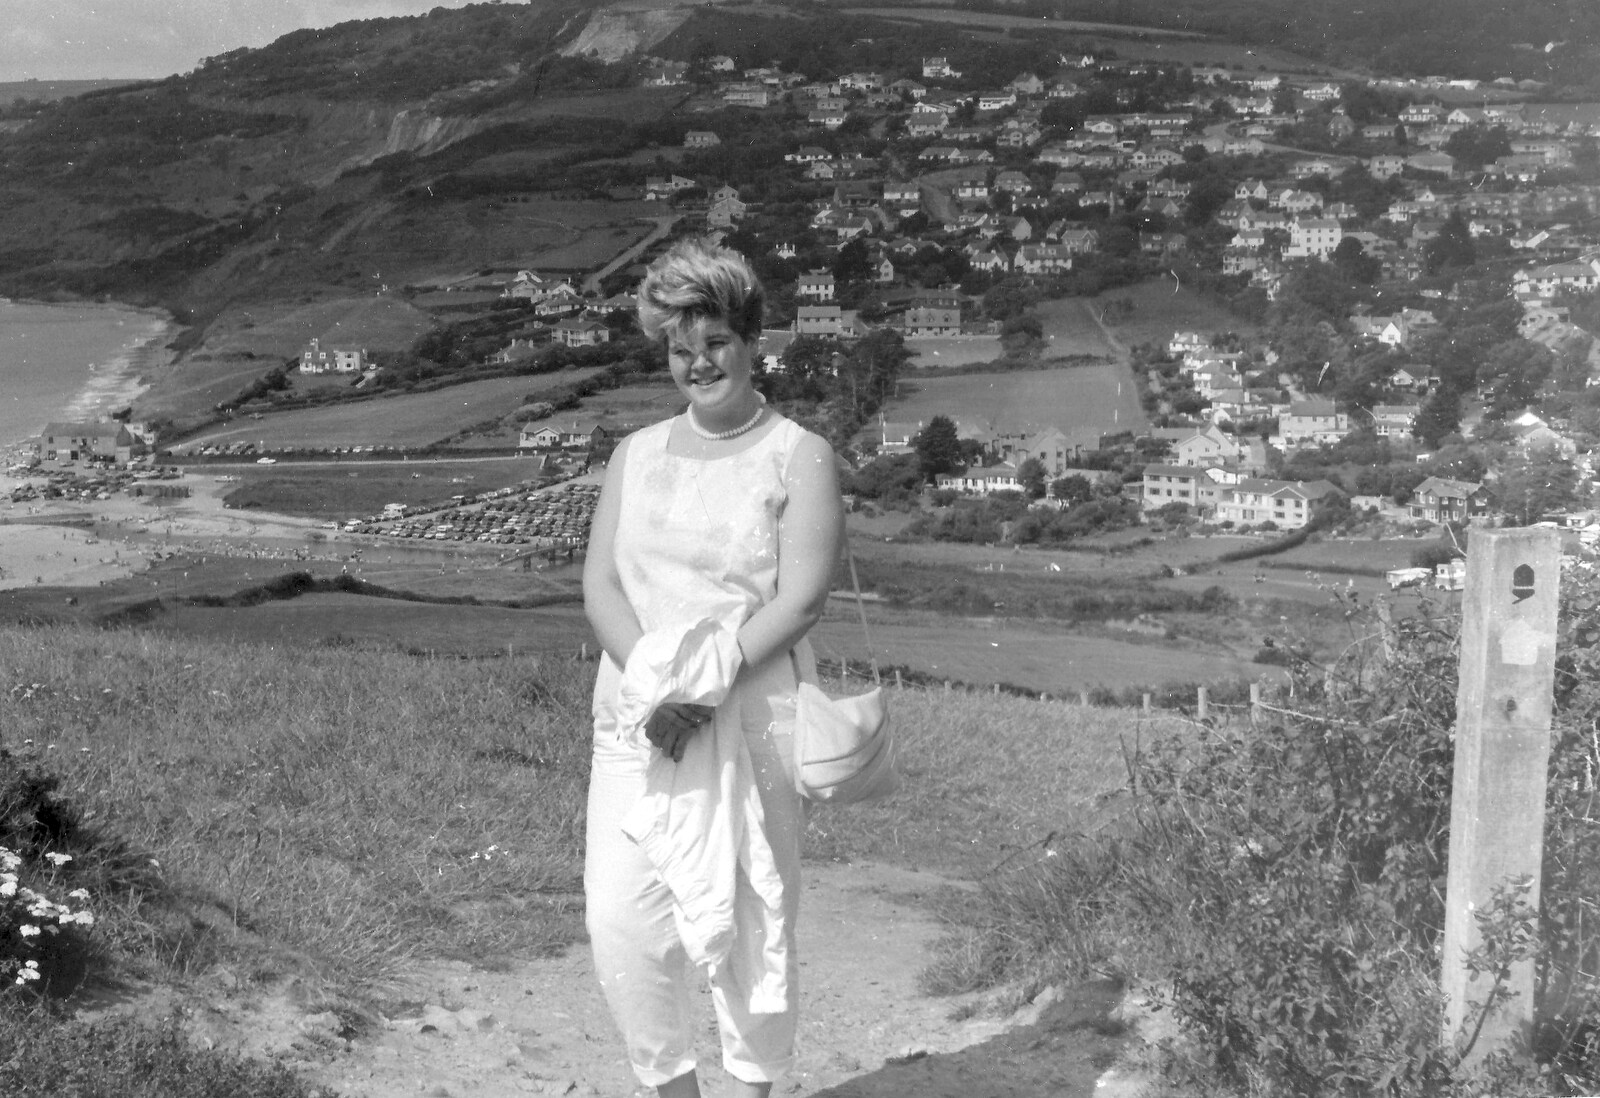 Carol, with Charmouth in the background from Phil's Birthday and Newlands Camping, Charmouth and Hordle, Dorset and Hampshire - 7th August 1985